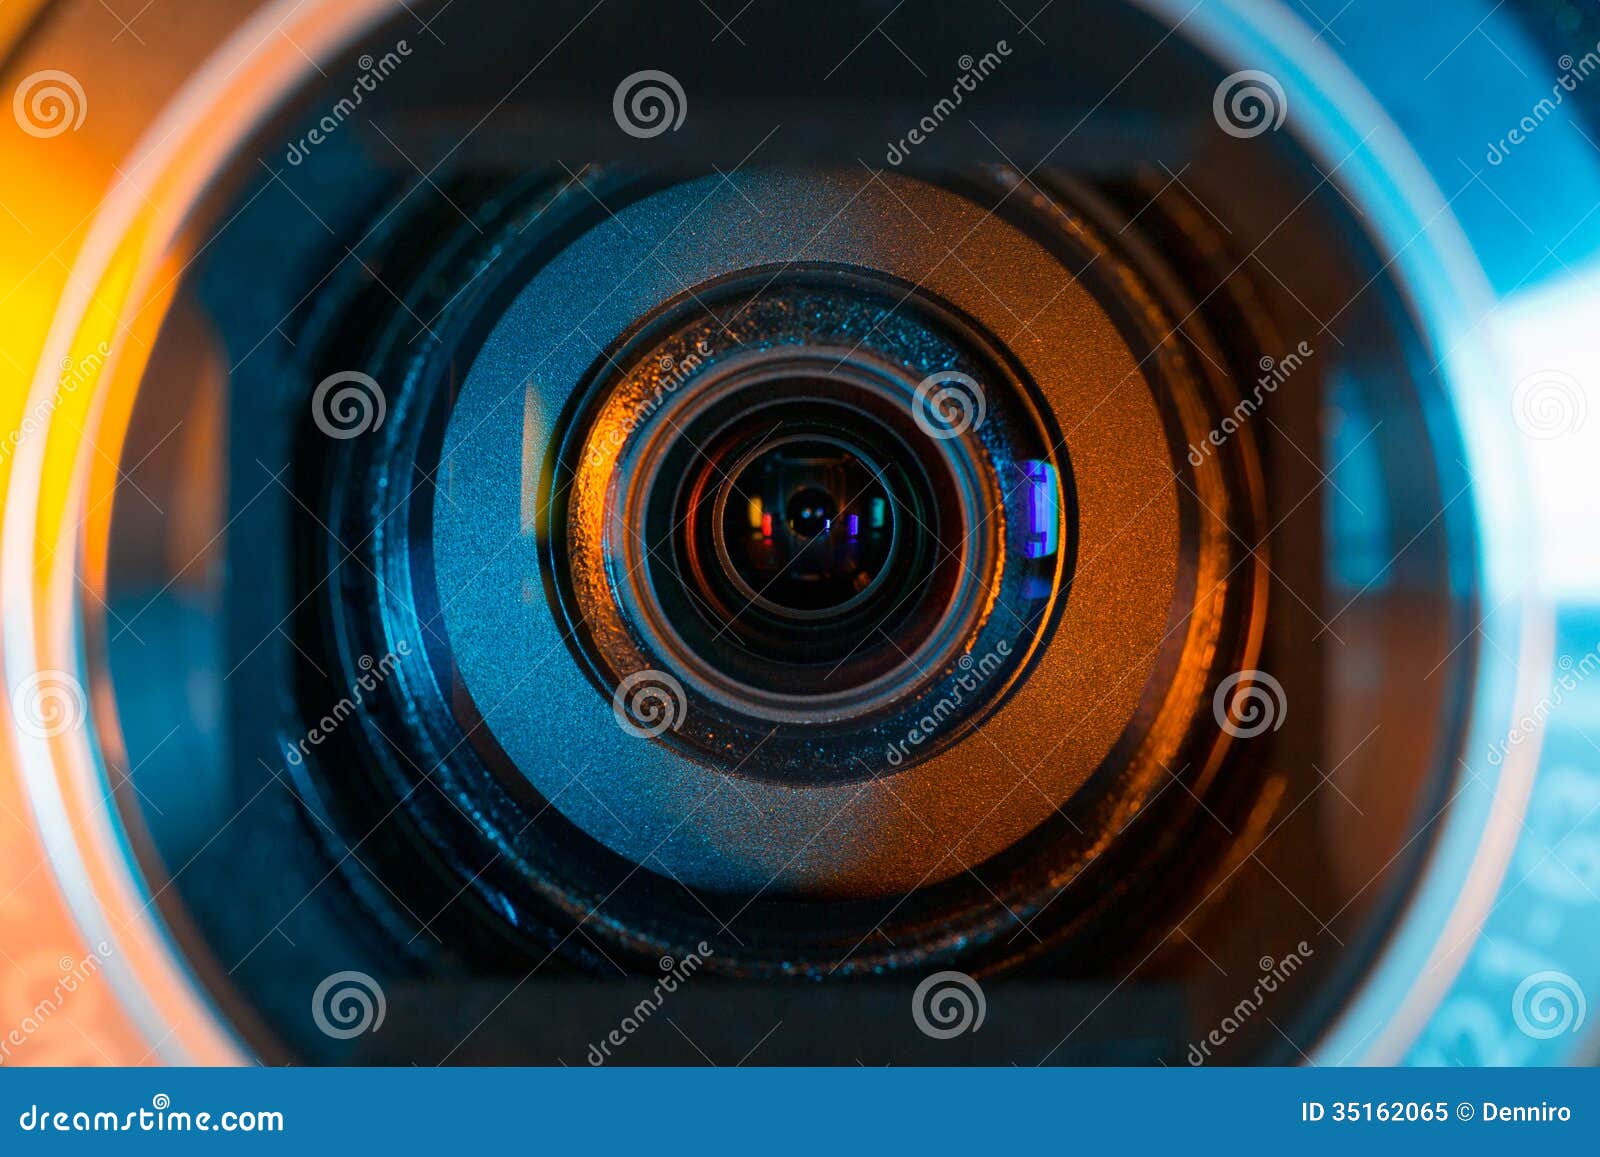 5,913 Game Multiplayer Video Stock Photos - Free & Royalty-Free Stock  Photos from Dreamstime